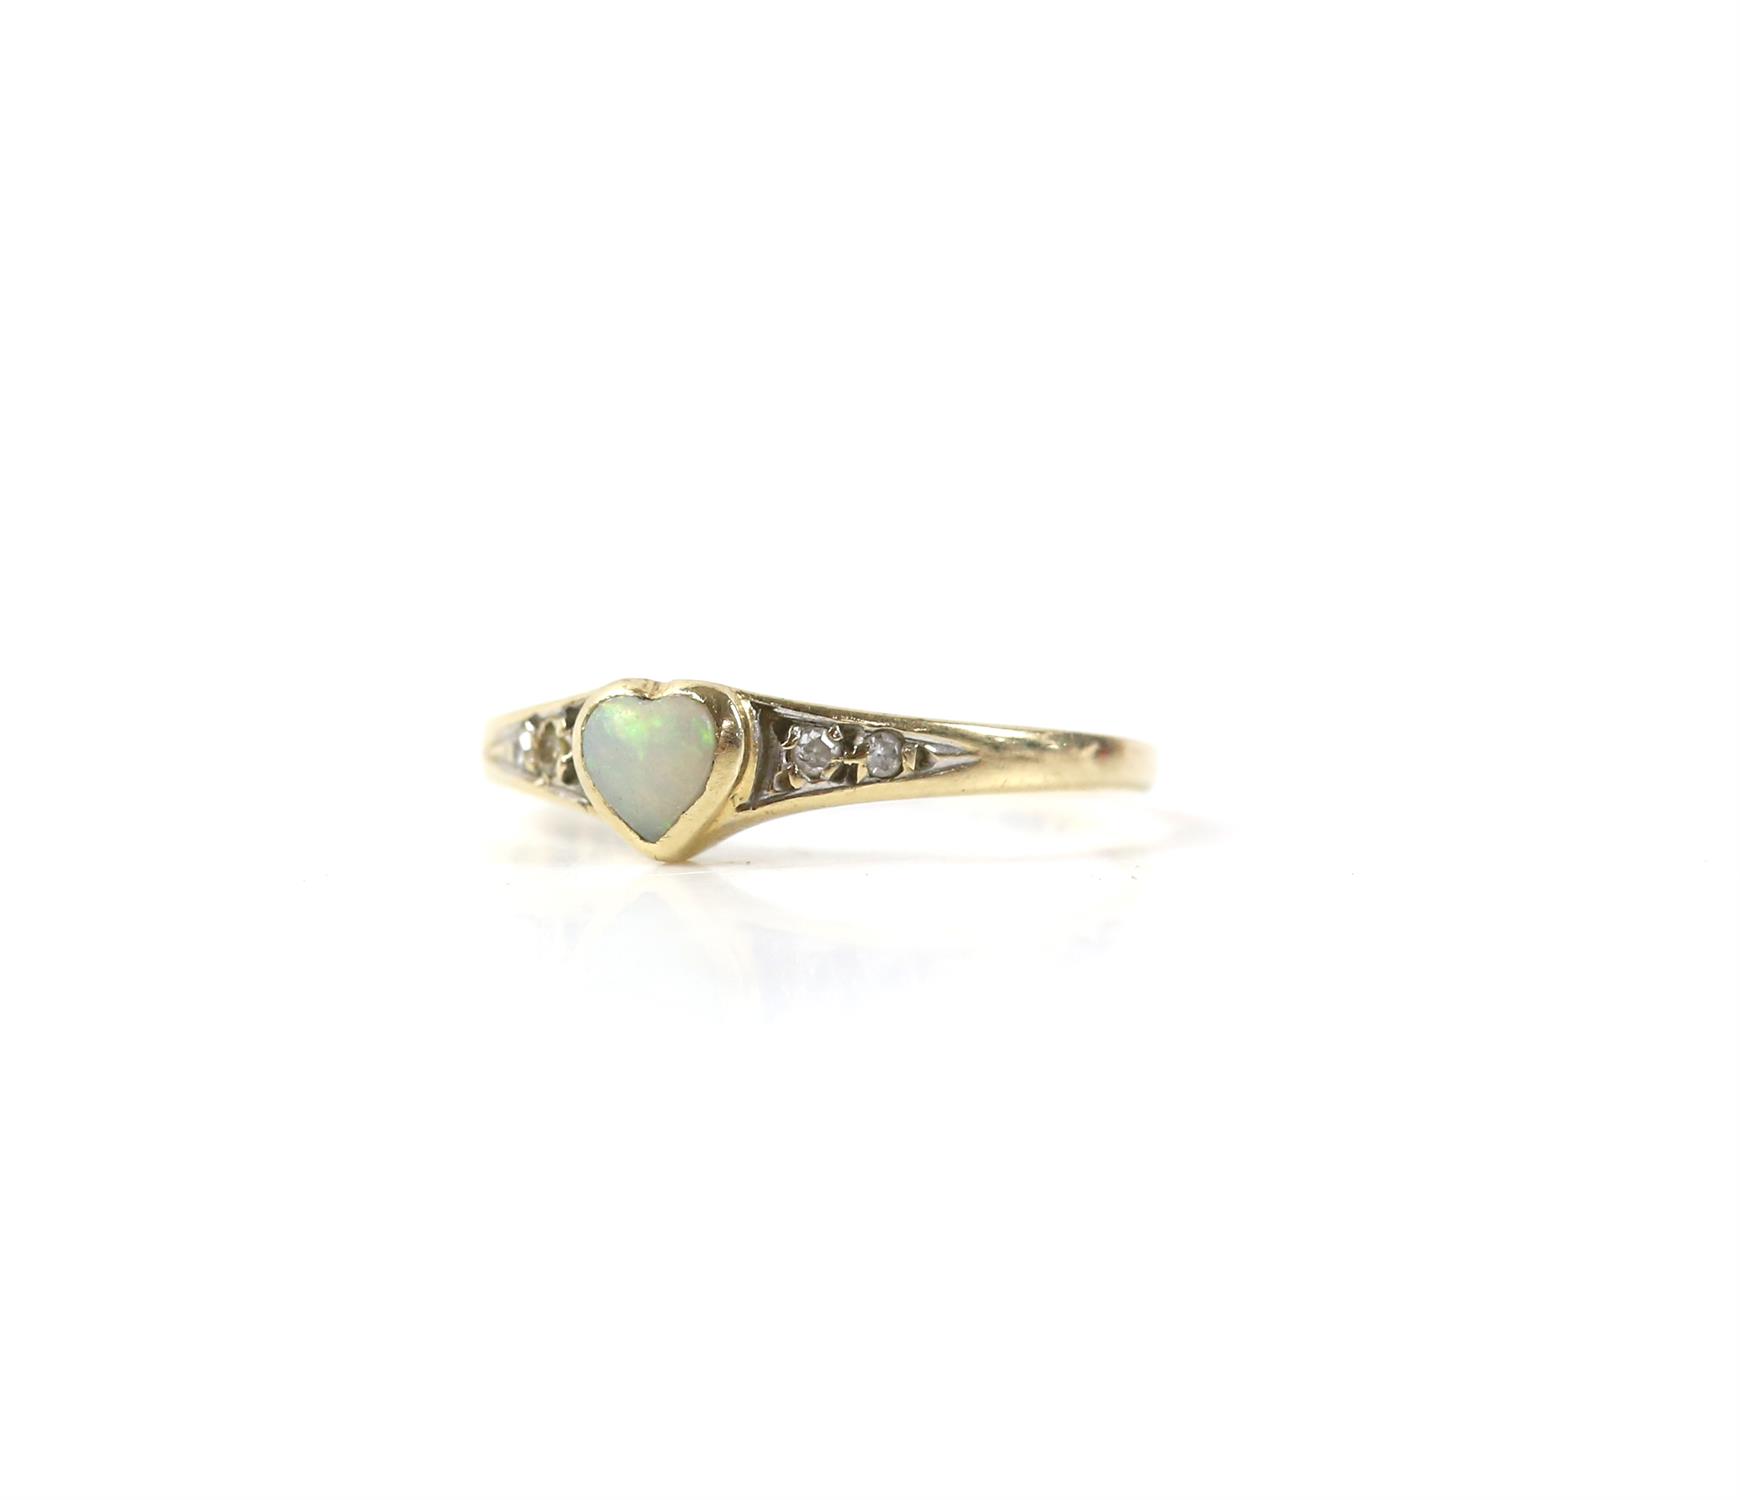 Opal ring, heart shaped opal rubover set in 9 ct yellow gold, with diamond set shoulders,